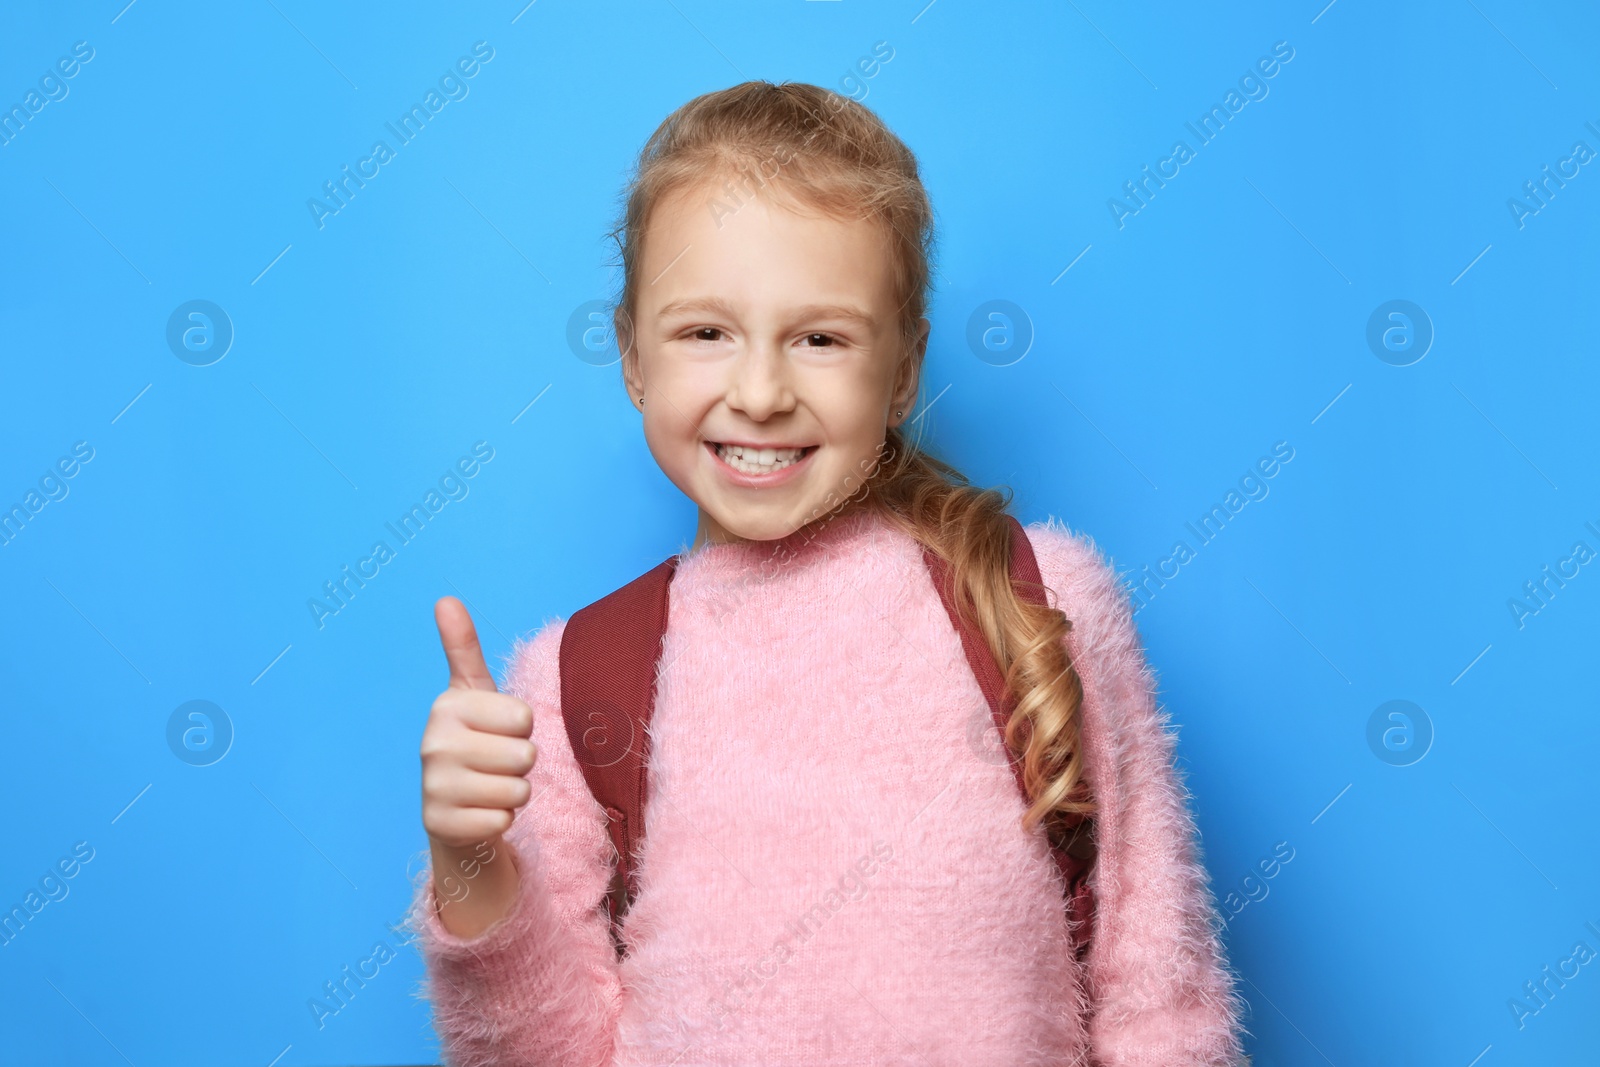 Photo of Happy little girl with backpack showing thumbs up on light blue background